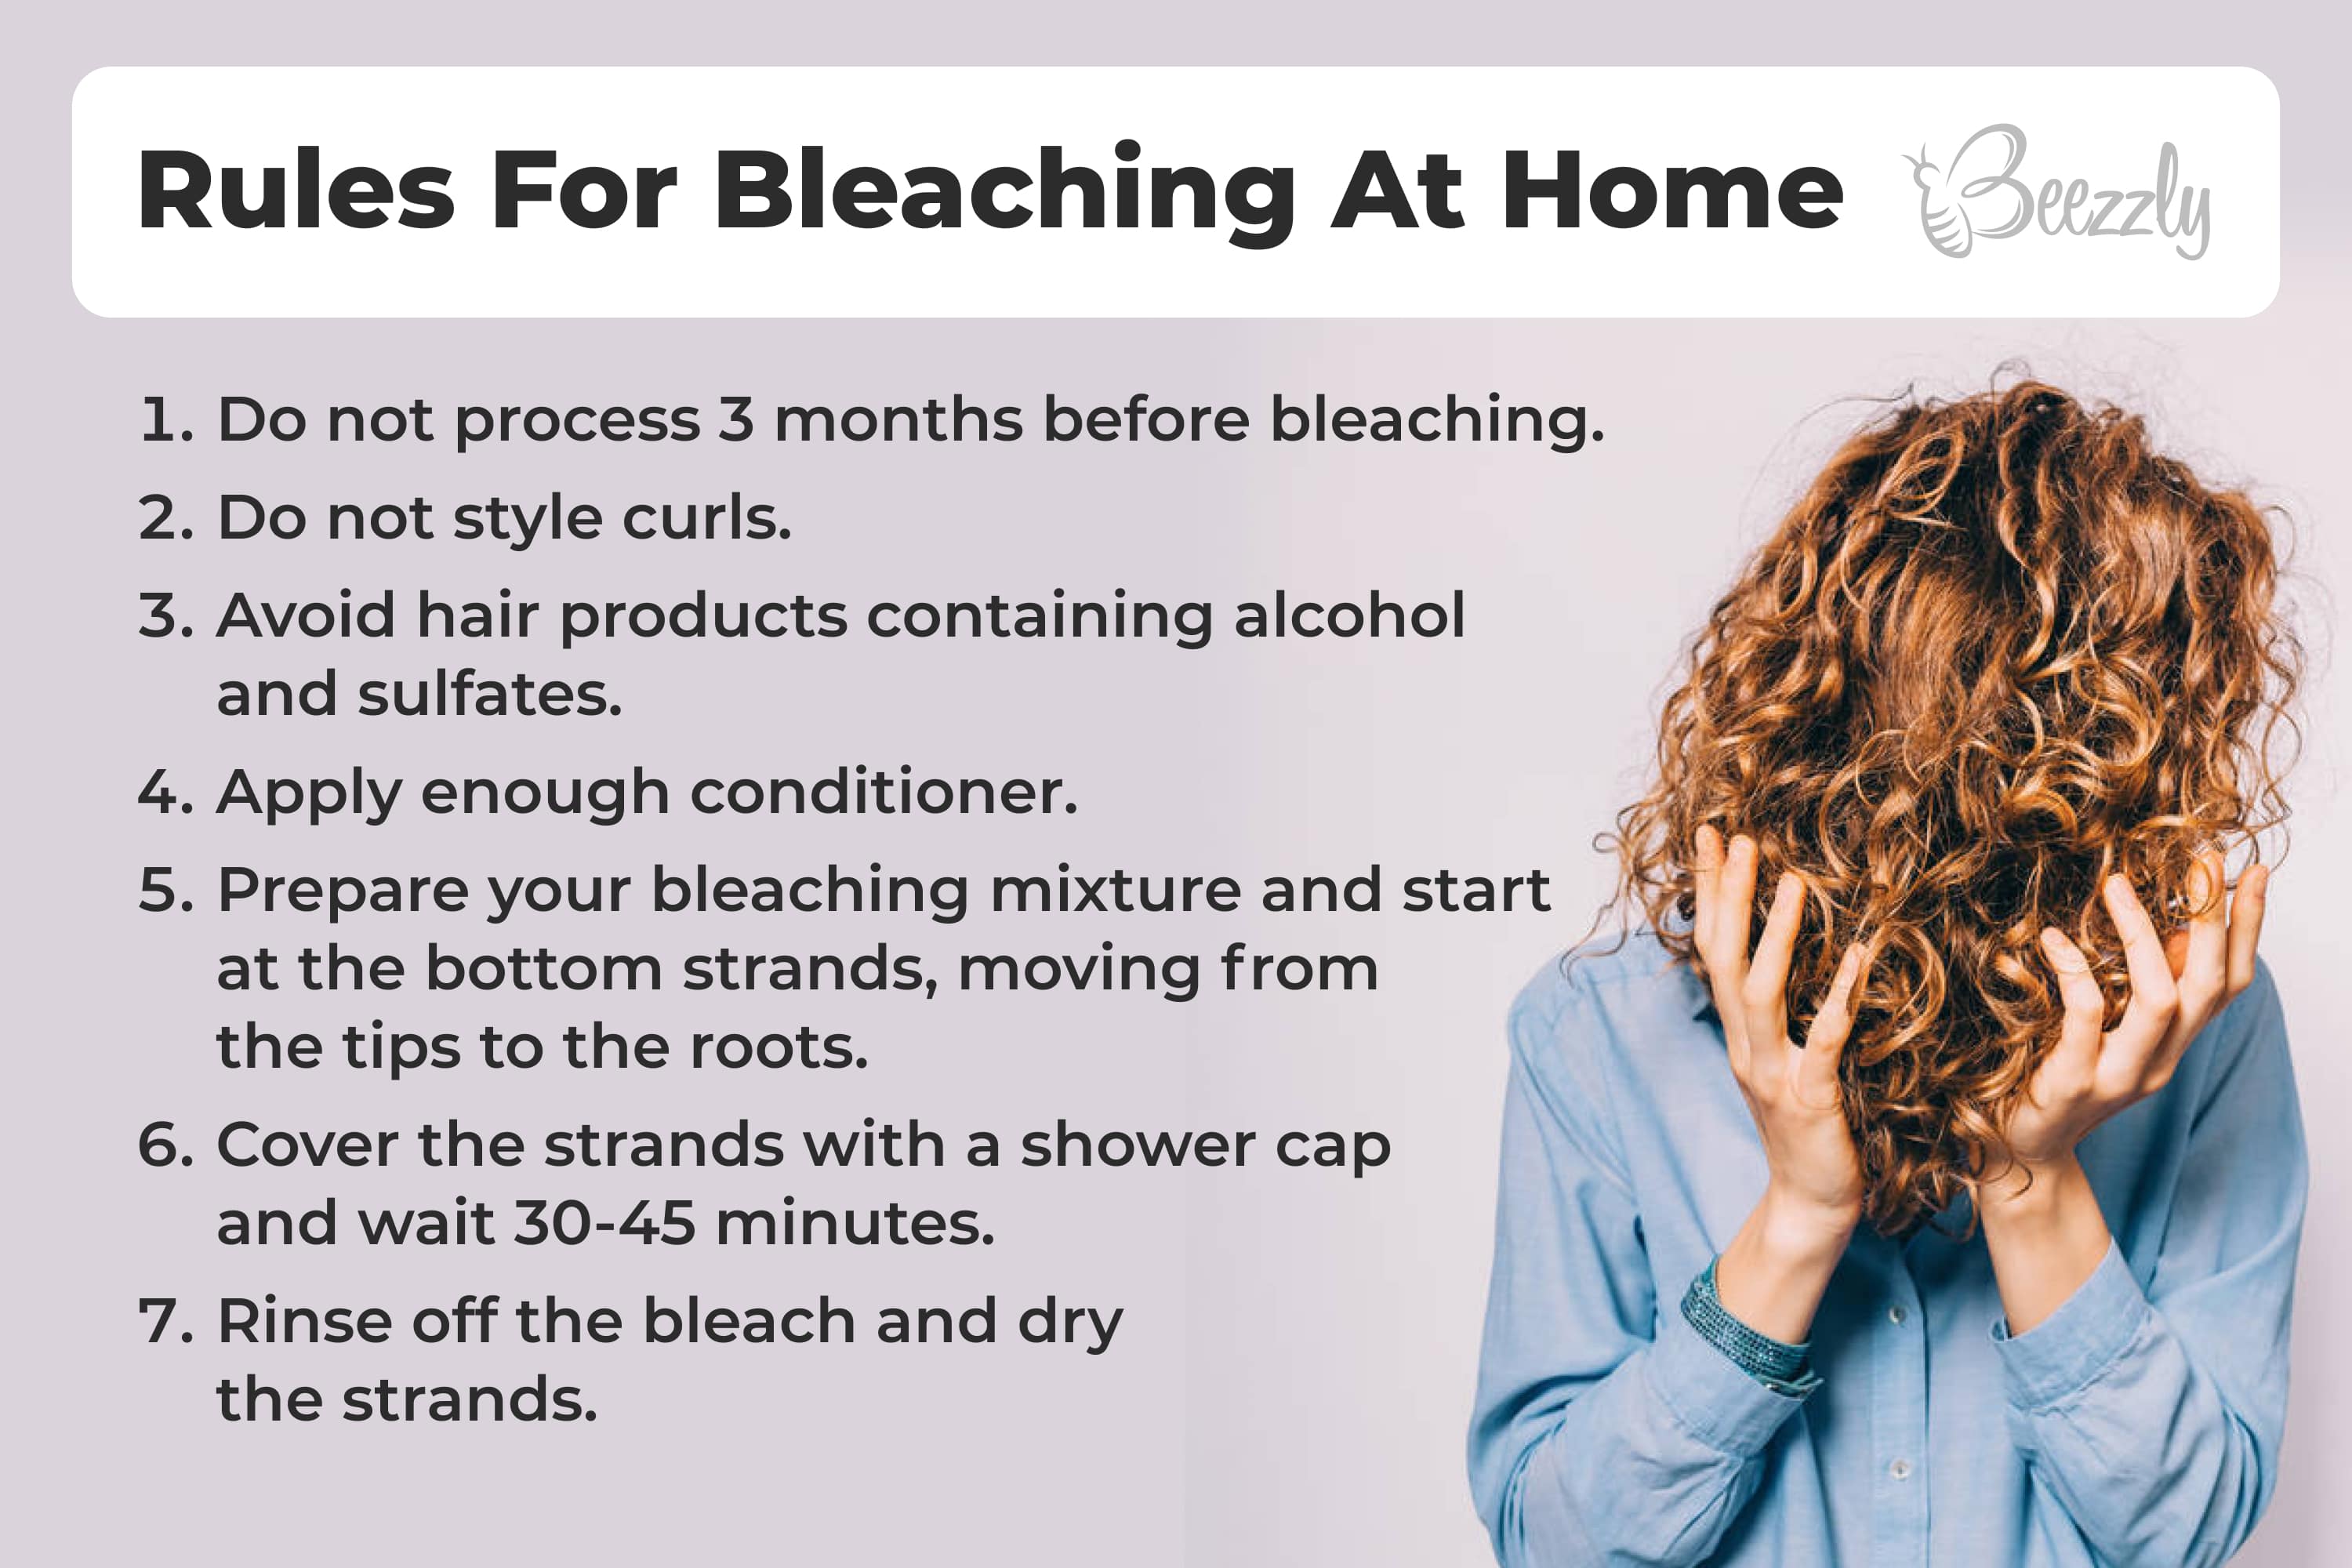 Rules for bleaching at home